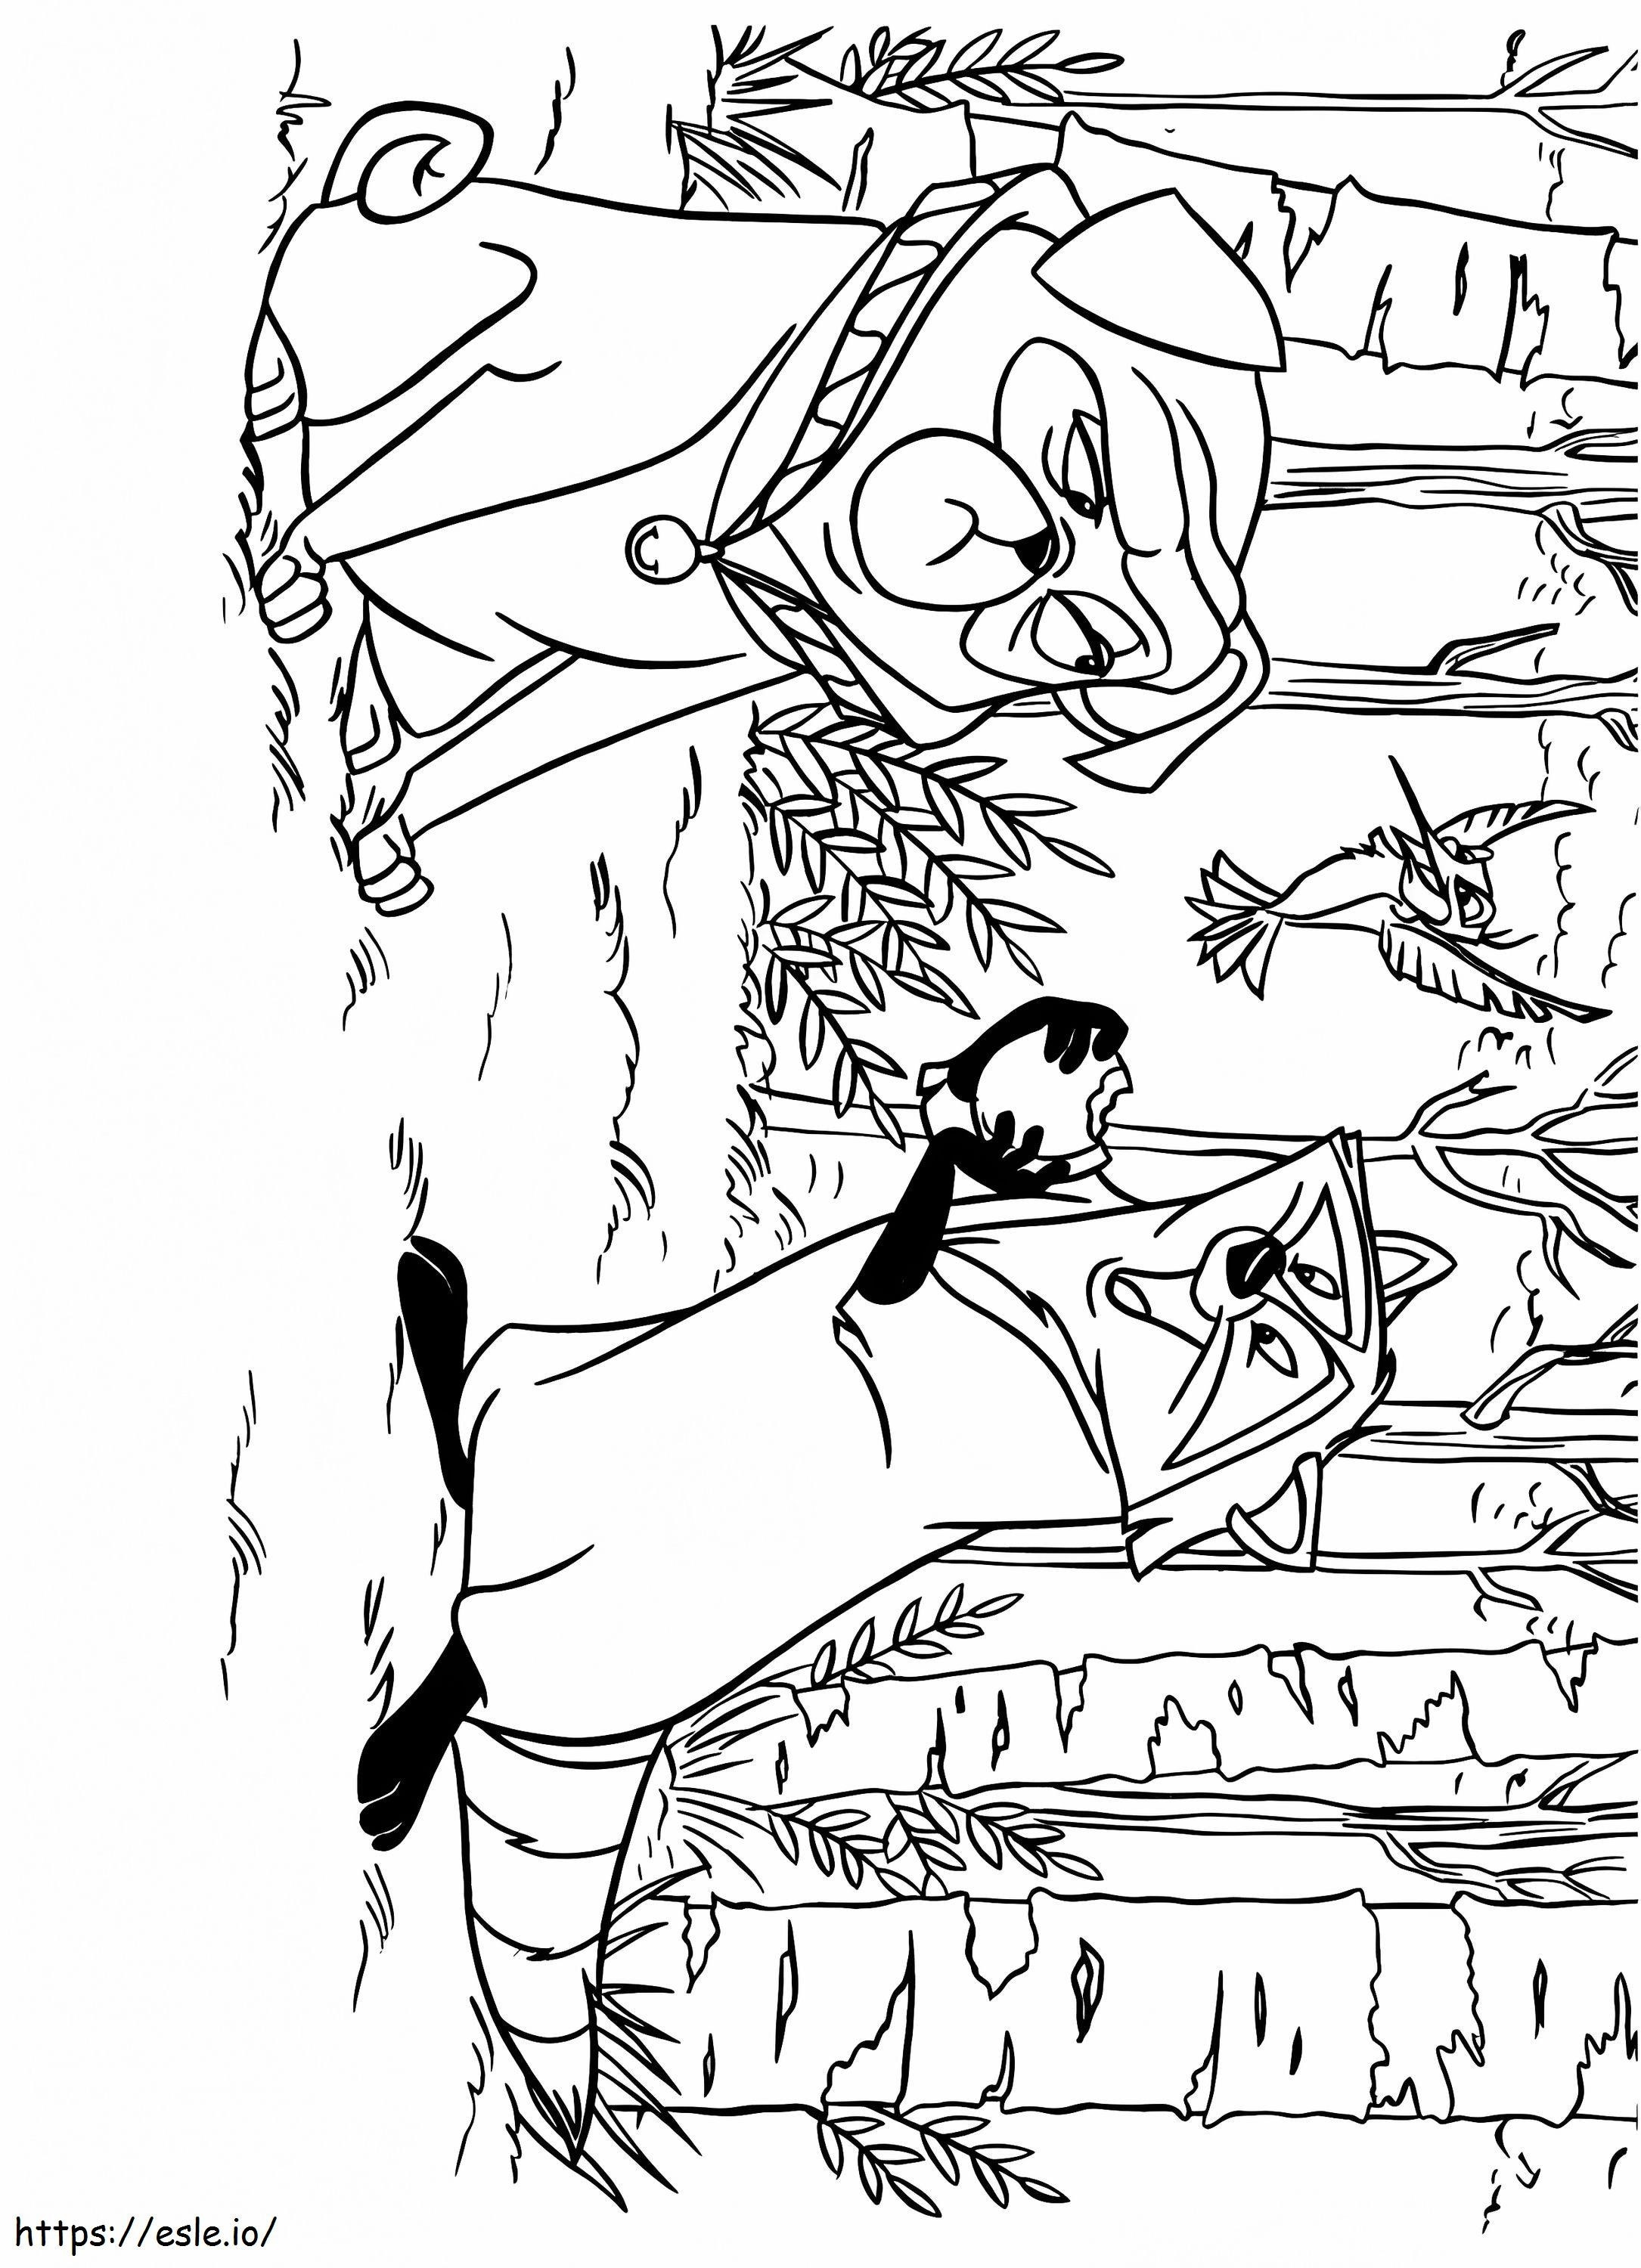 1561707279 Percy And Meeko A4 coloring page